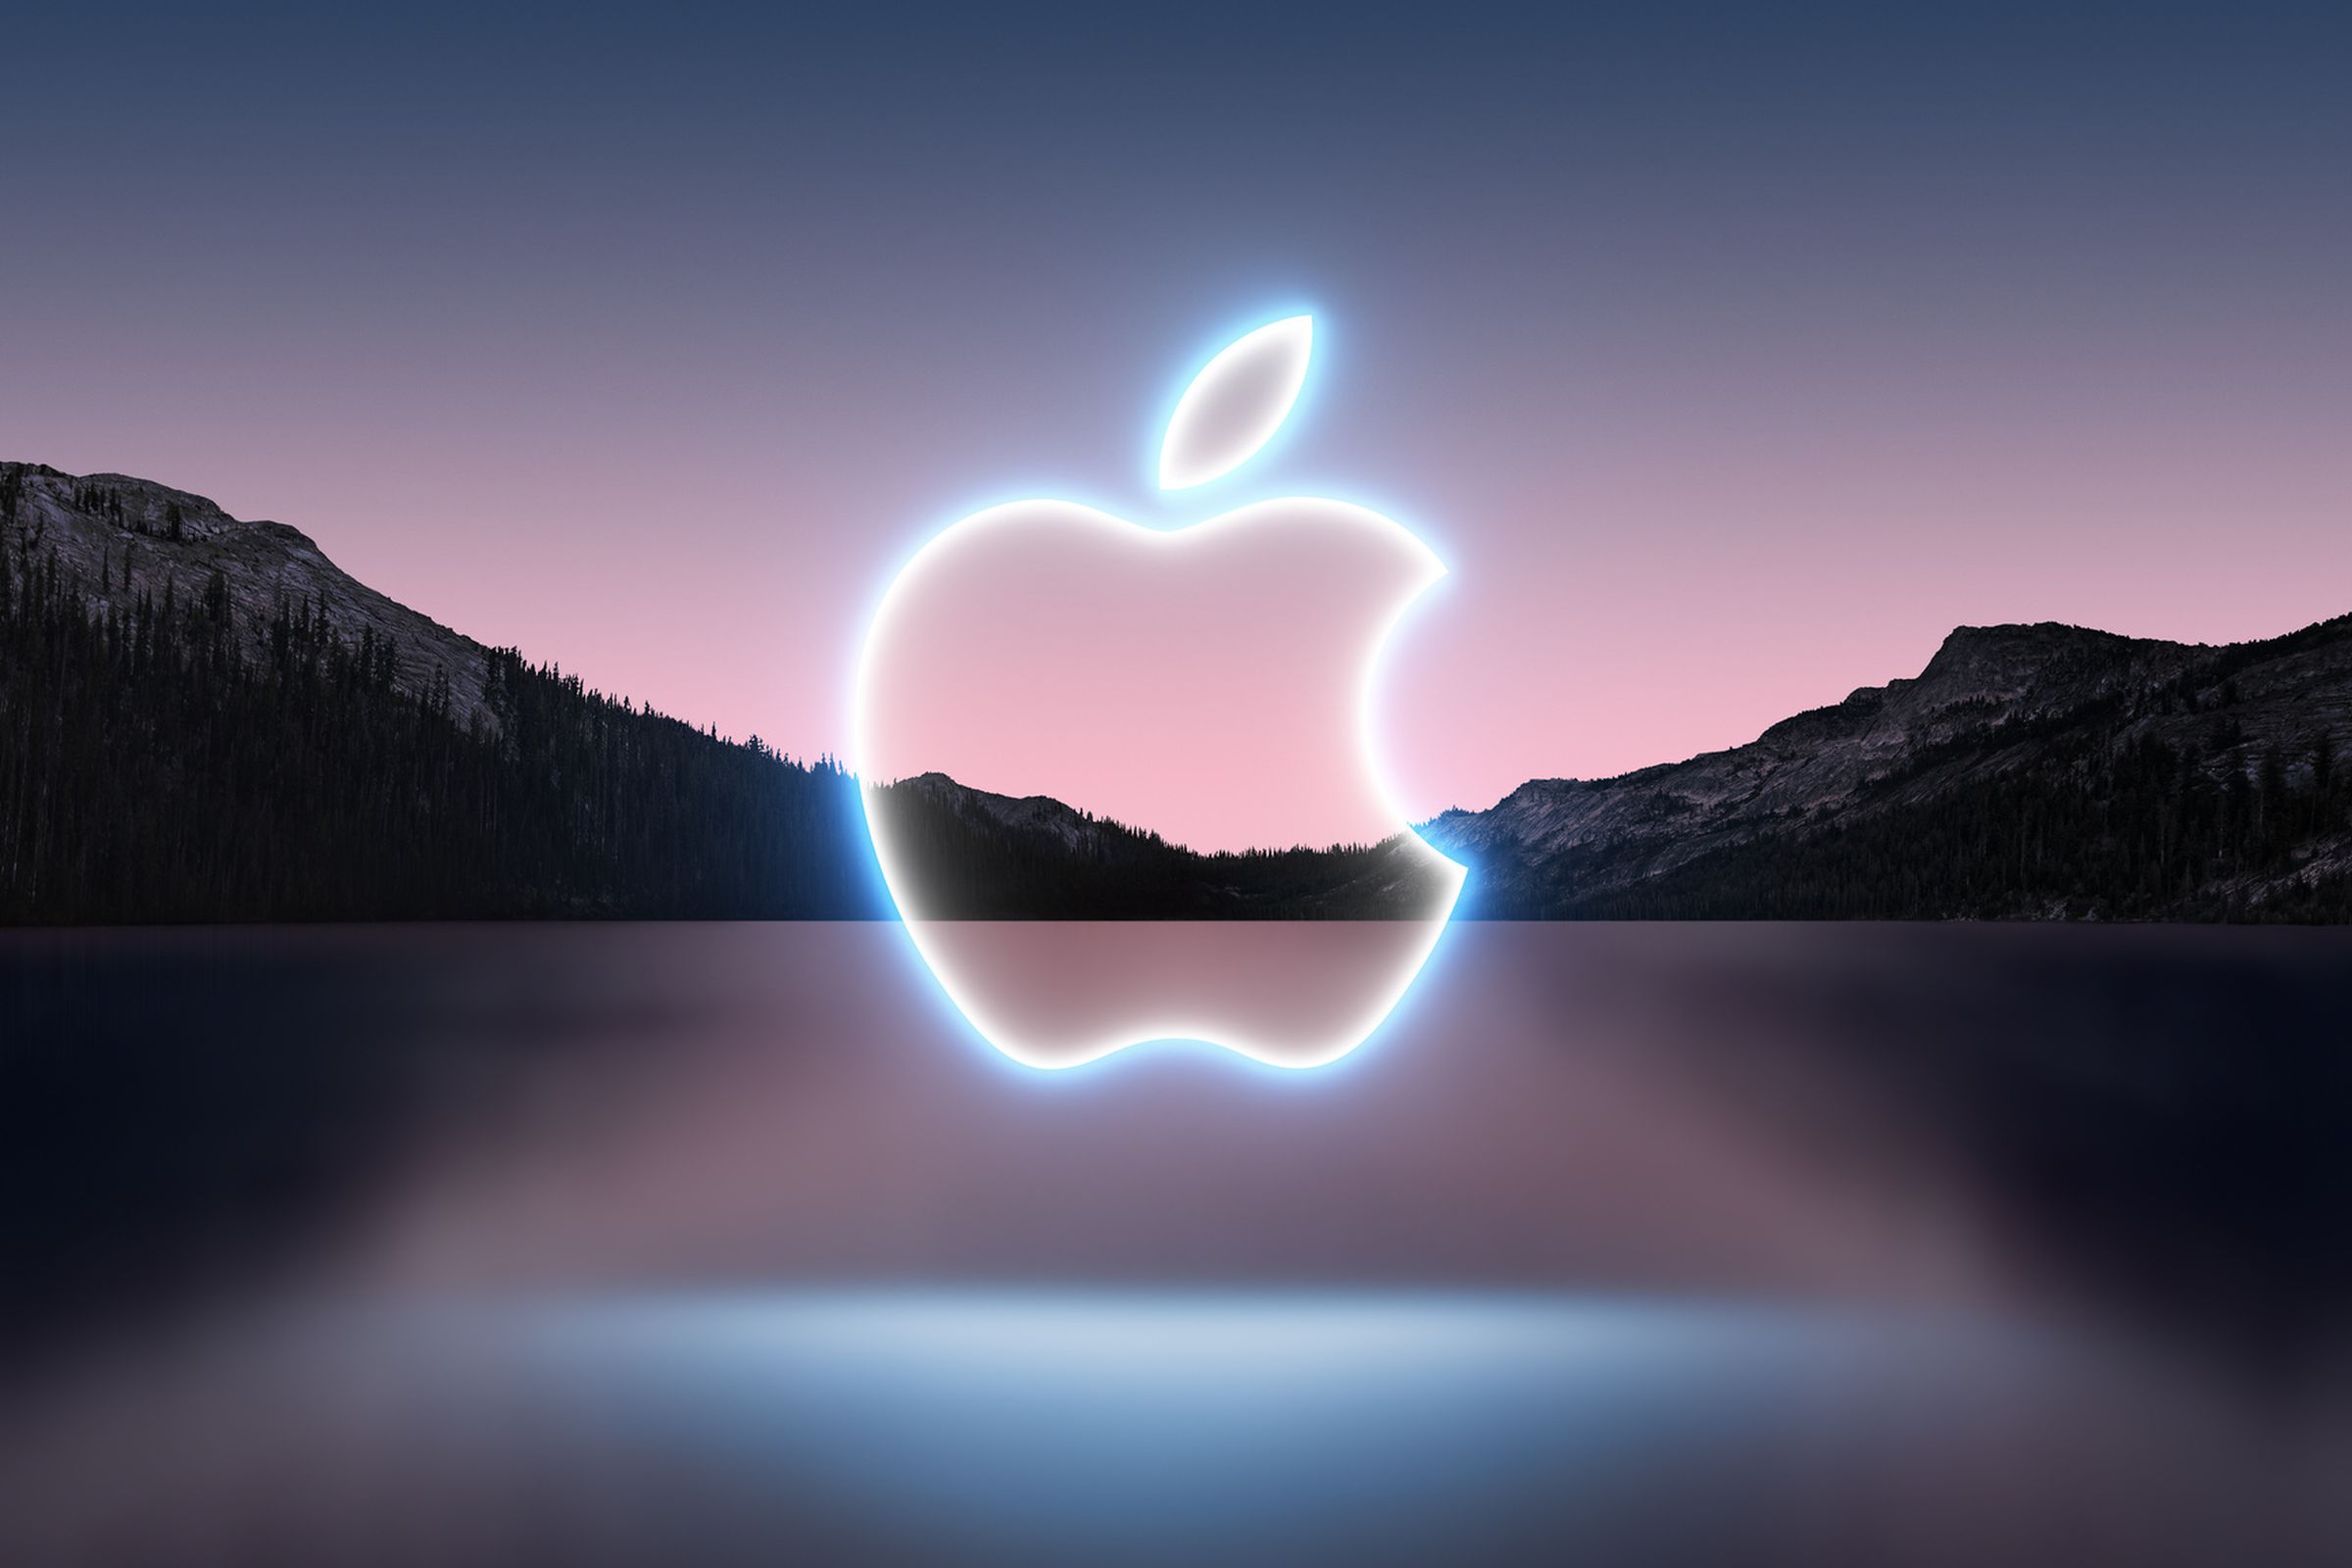 A promo image for Apple’s next event.